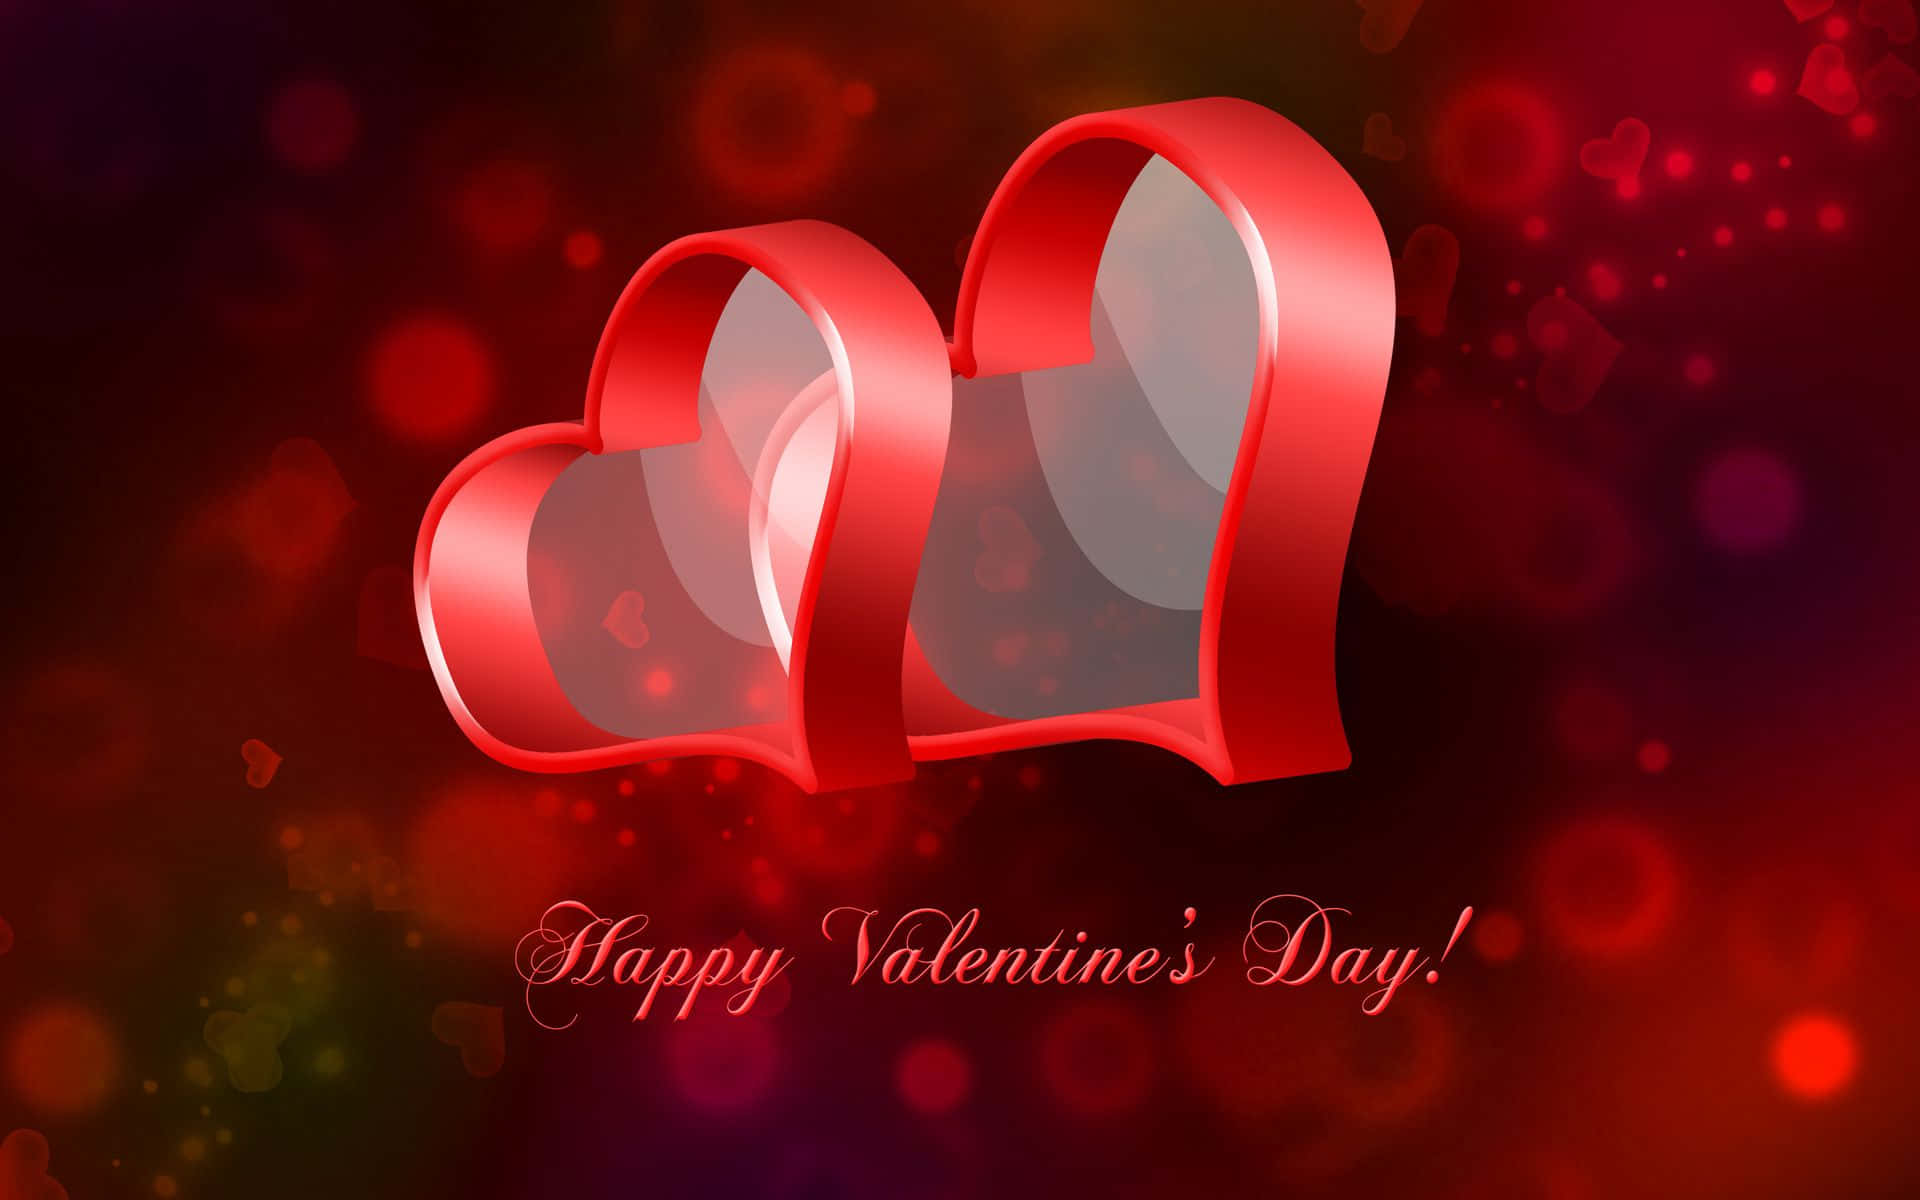 Celebrate Love this Valentines Day! Wallpaper